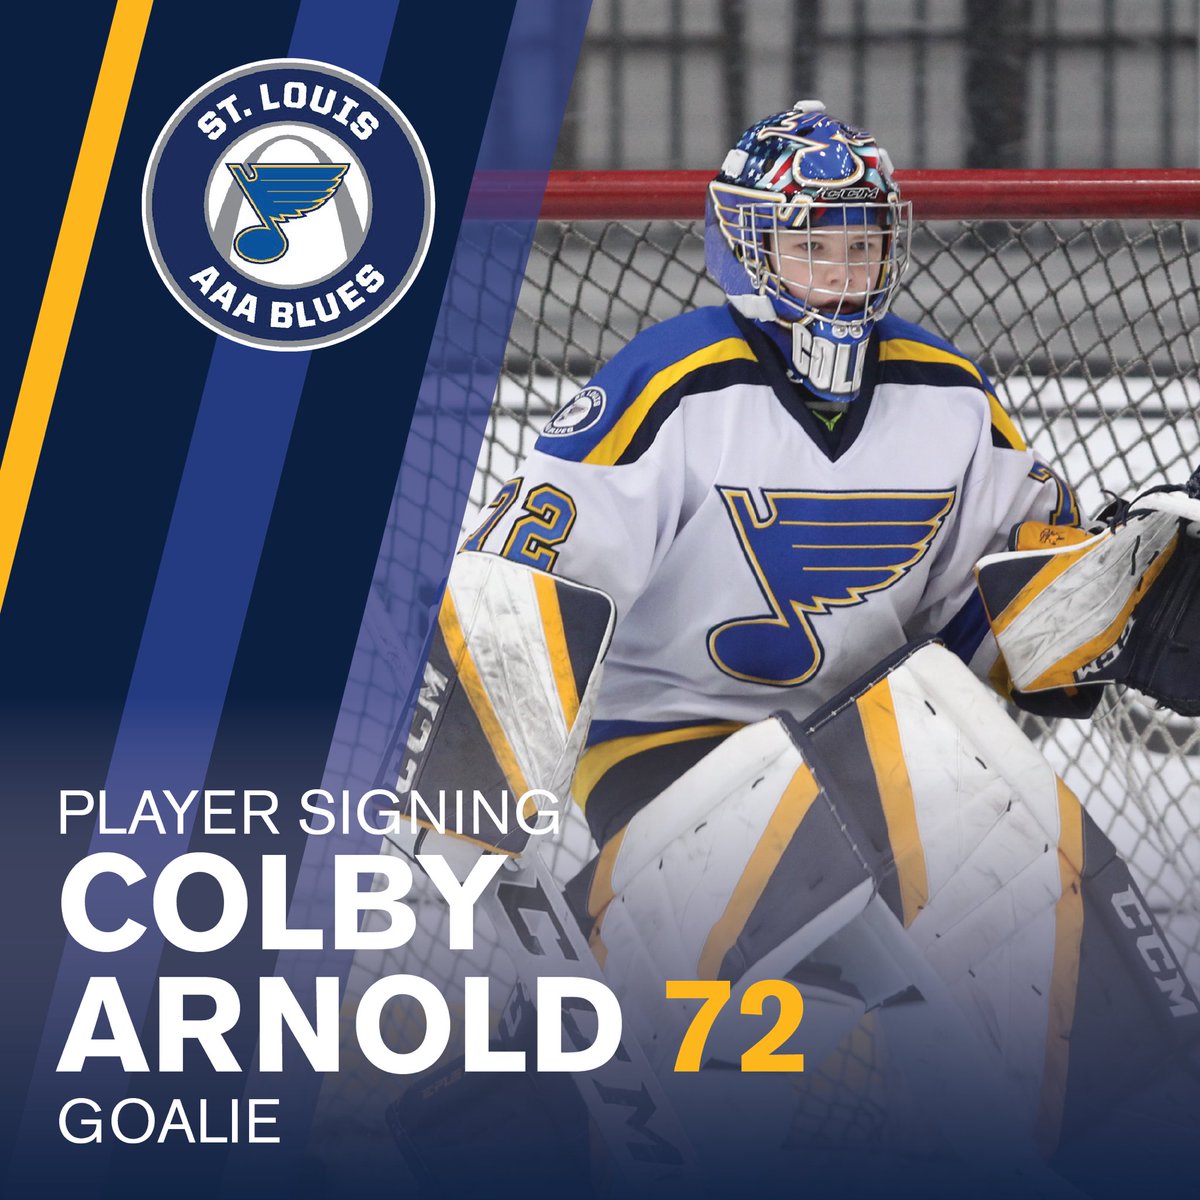 2023-24 Player Signing Announcement: We are excited to welcome back Colby Arnold! CA72 returns for his 3rd season with the @AAABlues #AAAHockey #BantamMinor